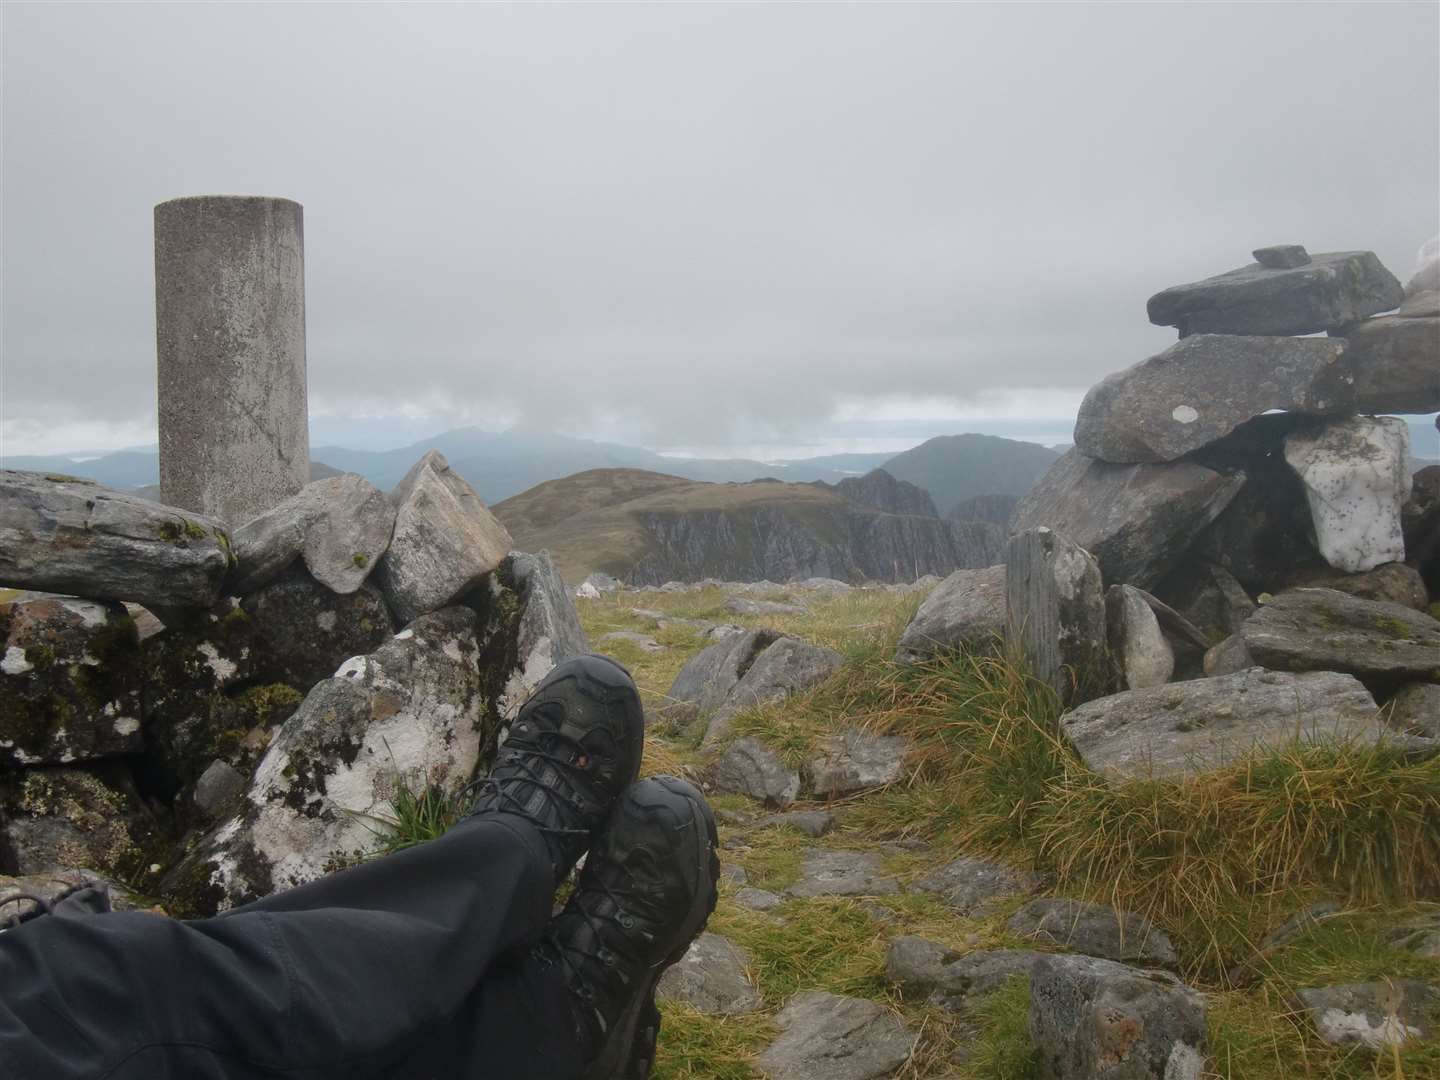 Time for feet up at the summit.